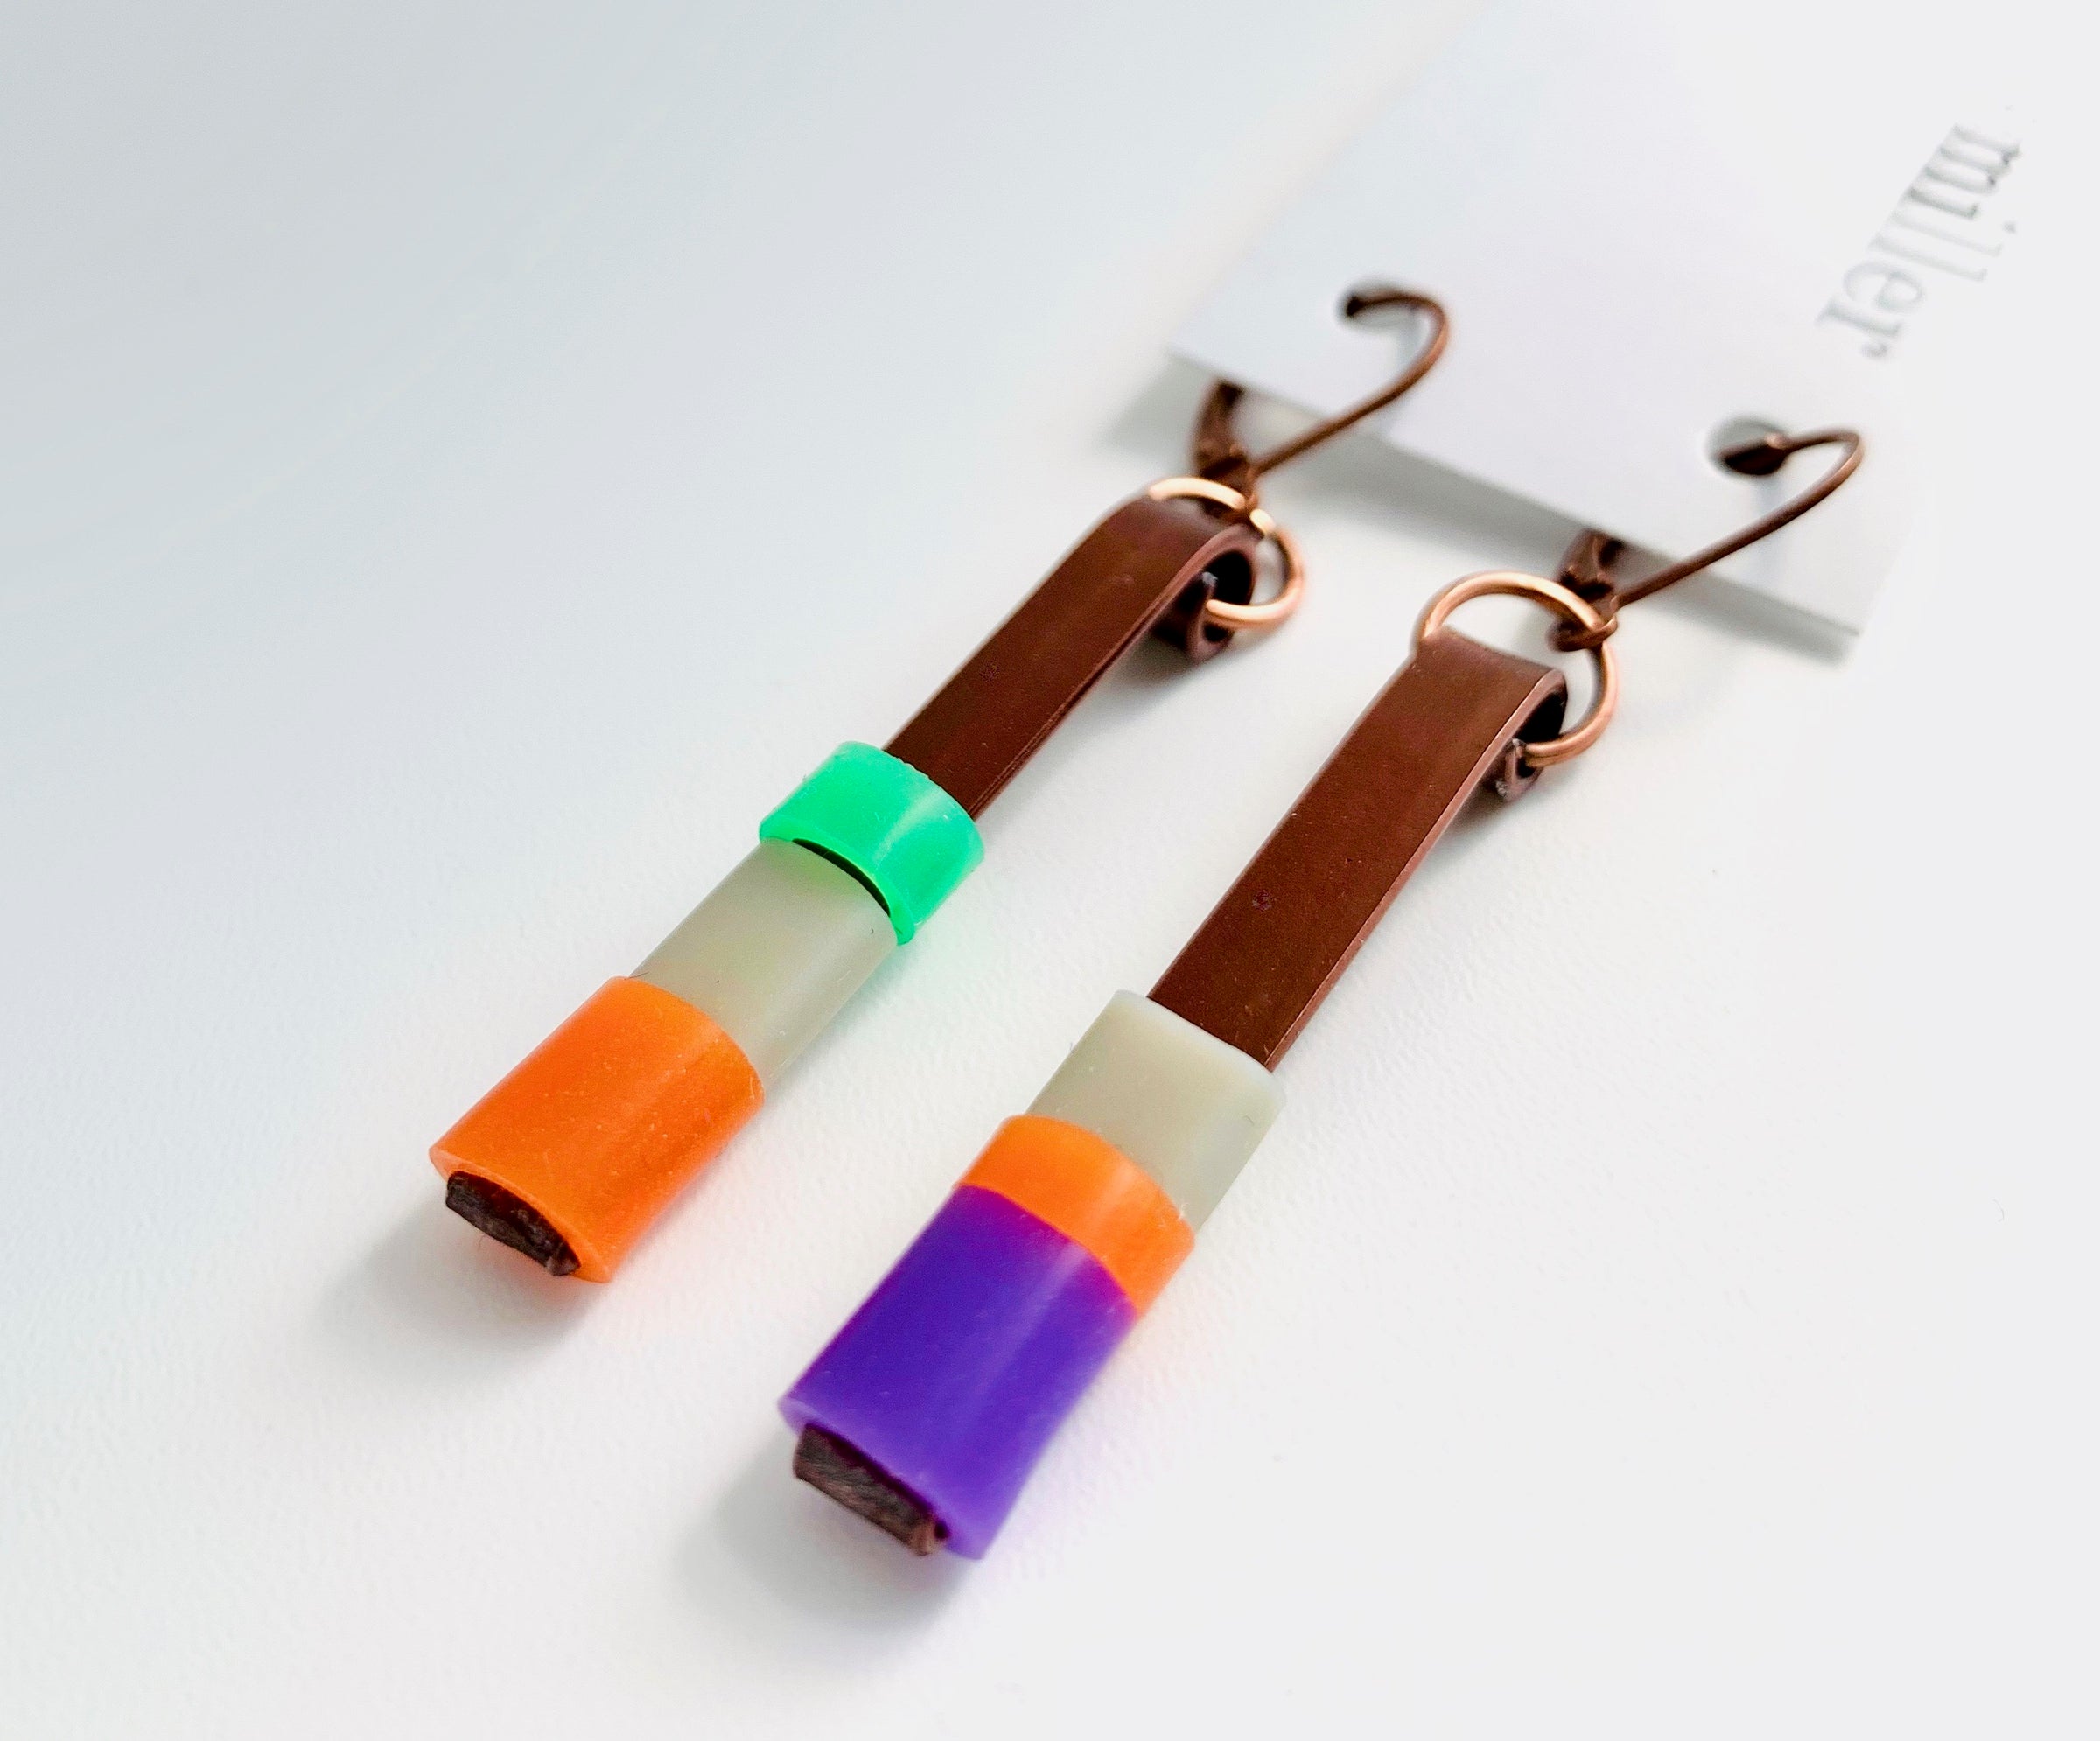 A nice colored matchstick earring